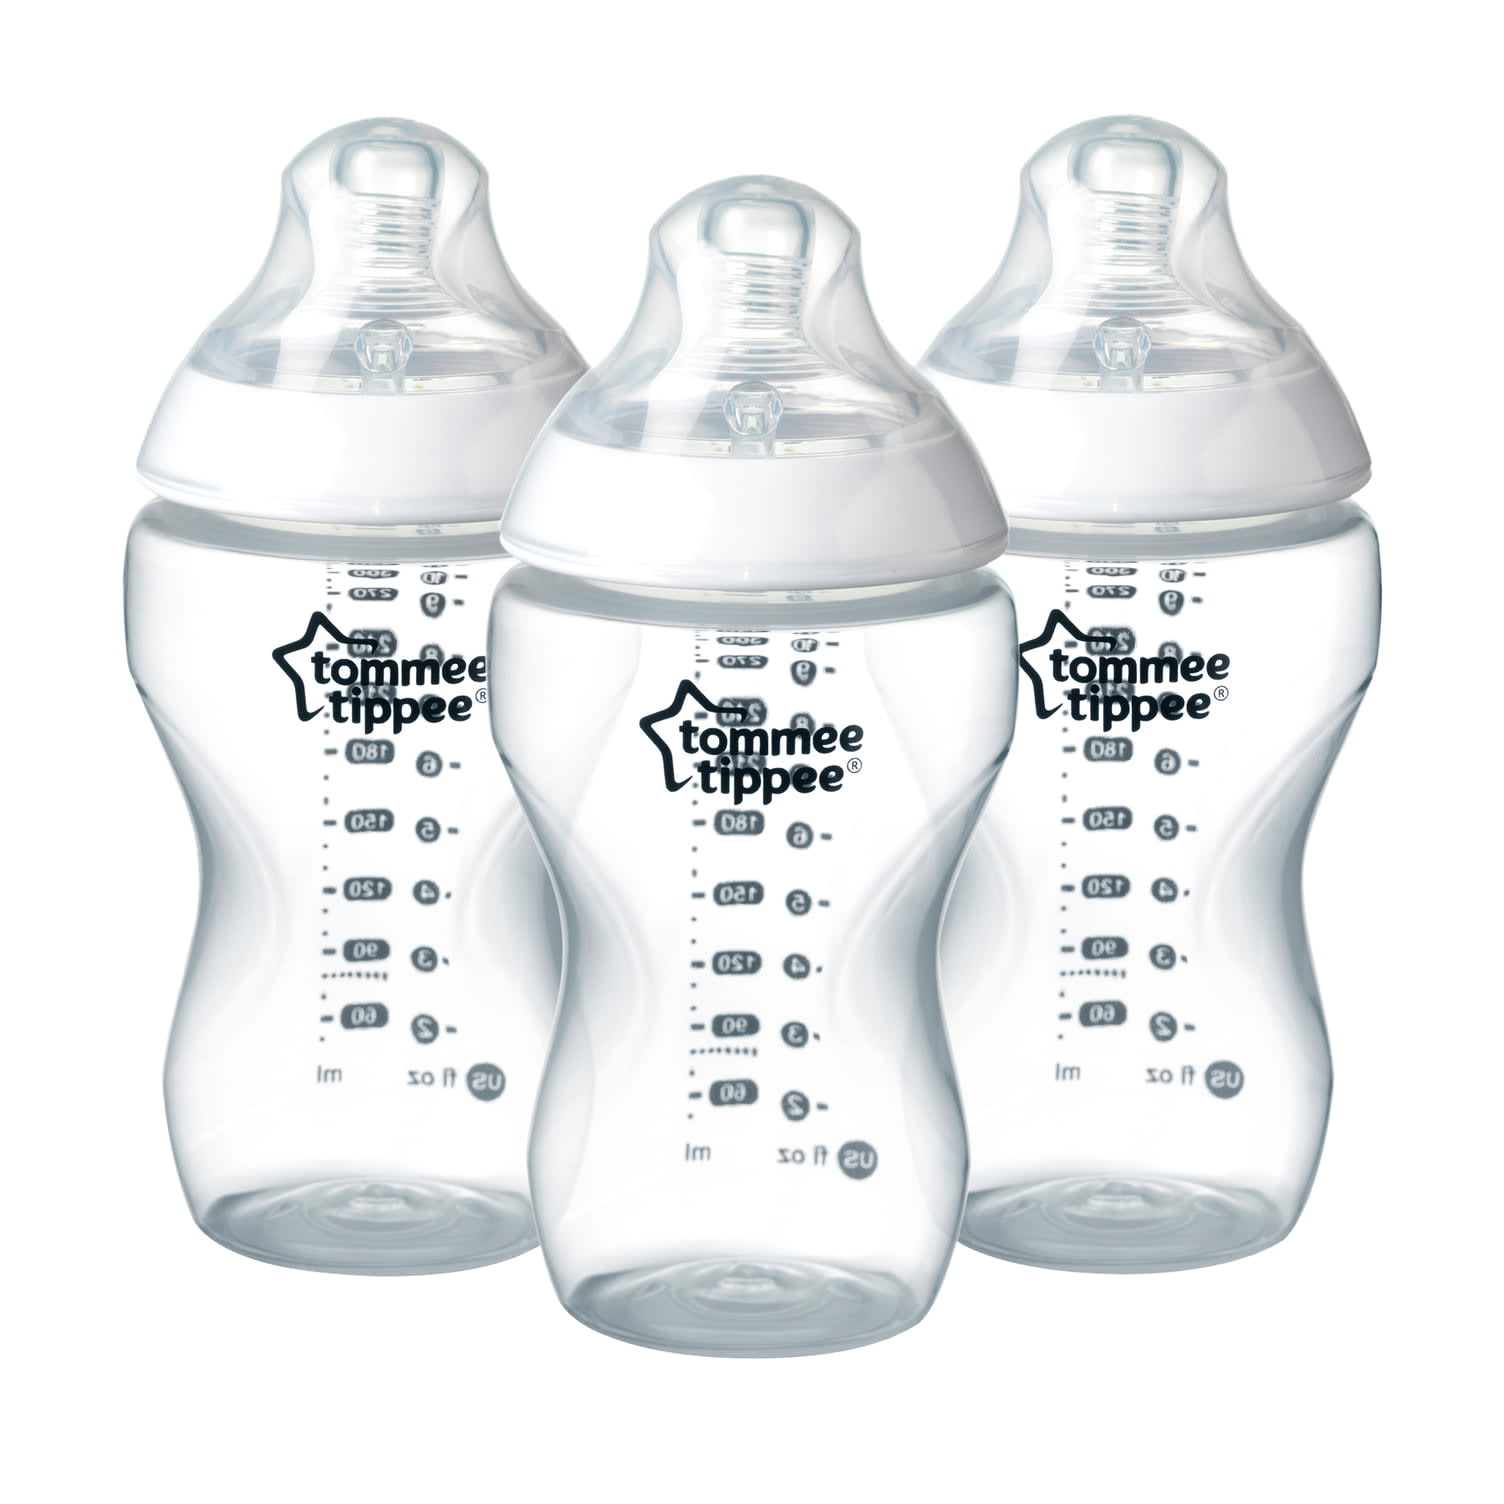 Tommee Tippee Anti-Colic Baby Bottles (9oz, 3 Count)  Slow Flow  Breast-Like Nipple, Unique Anti-Colic Vent 